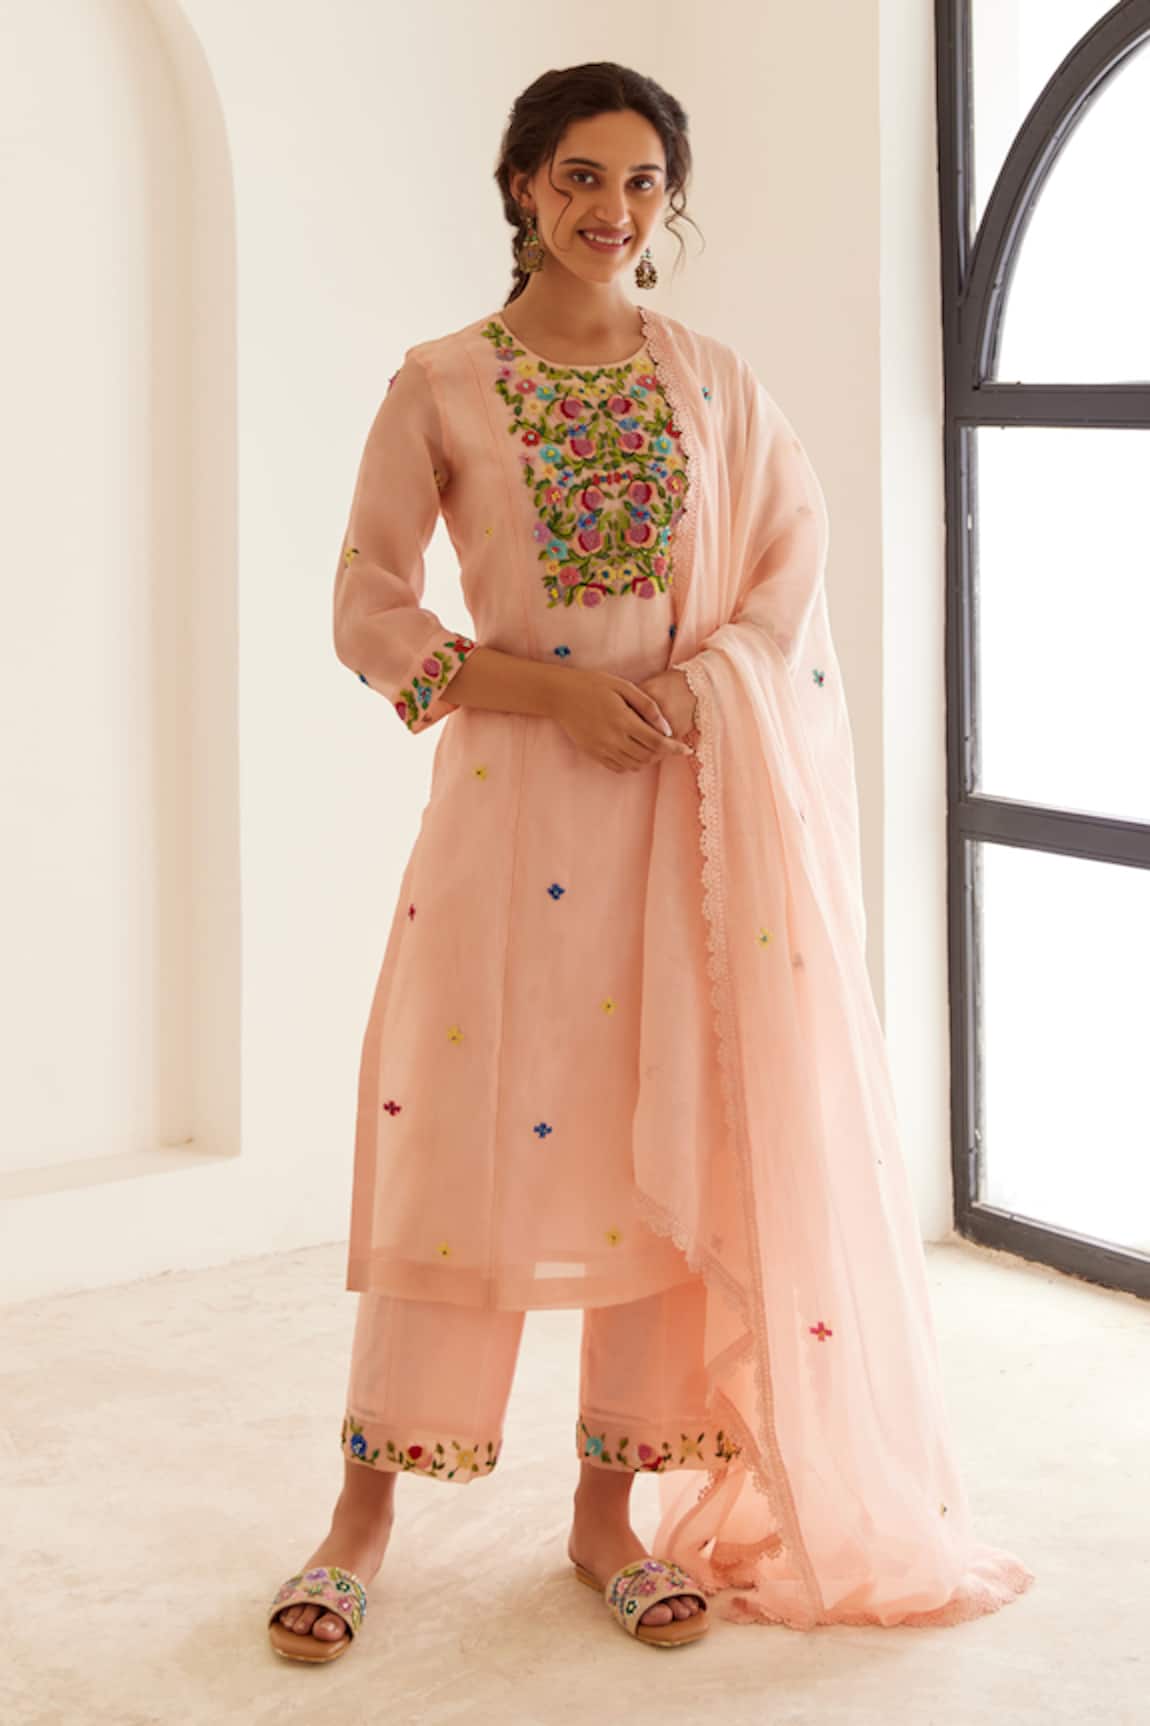 Buy Hot Pink Pant Suit Online In India - Phases by Alisha – phasesbyalisha